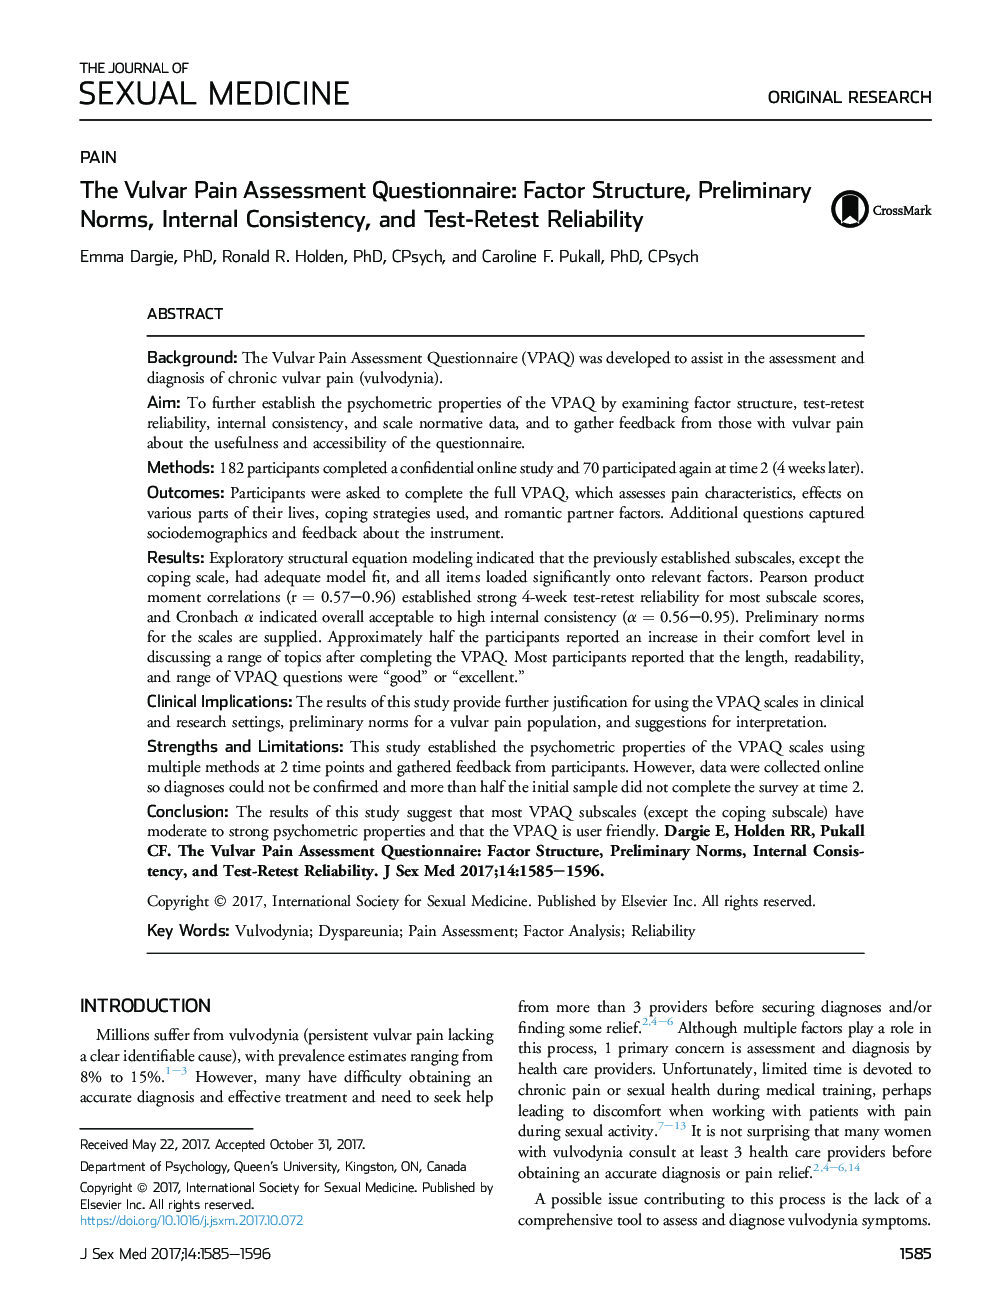 The Vulvar Pain Assessment Questionnaire: Factor Structure, Preliminary Norms, Internal Consistency, and Test-Retest Reliability